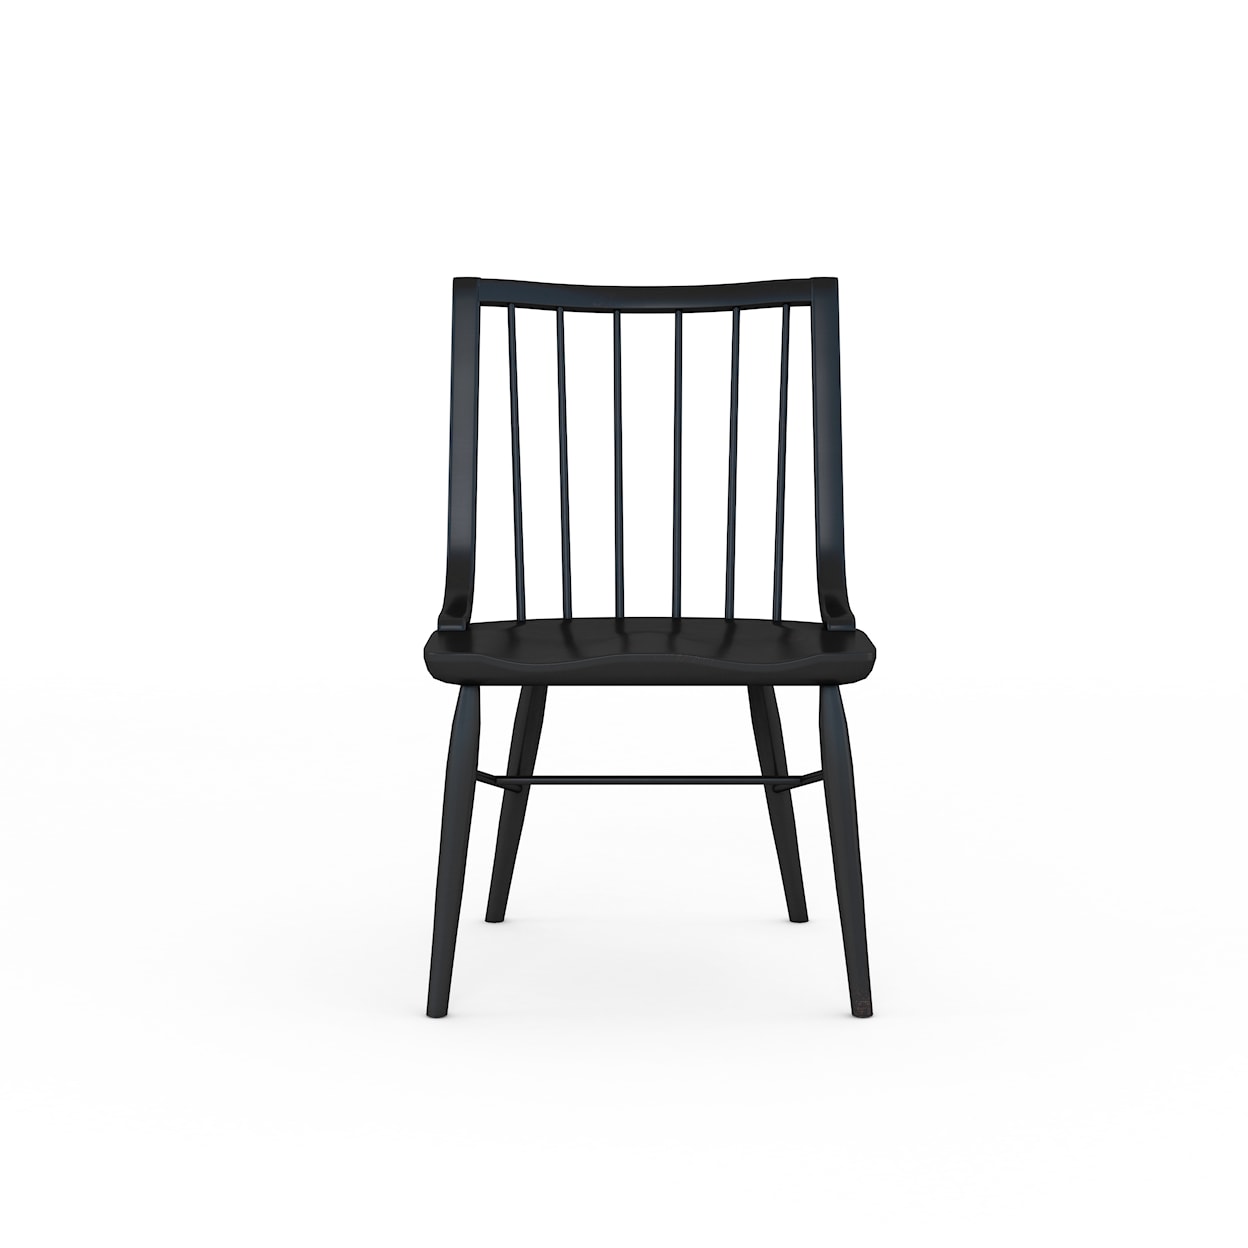 A.R.T. Furniture Inc Frame Dining Side Chair